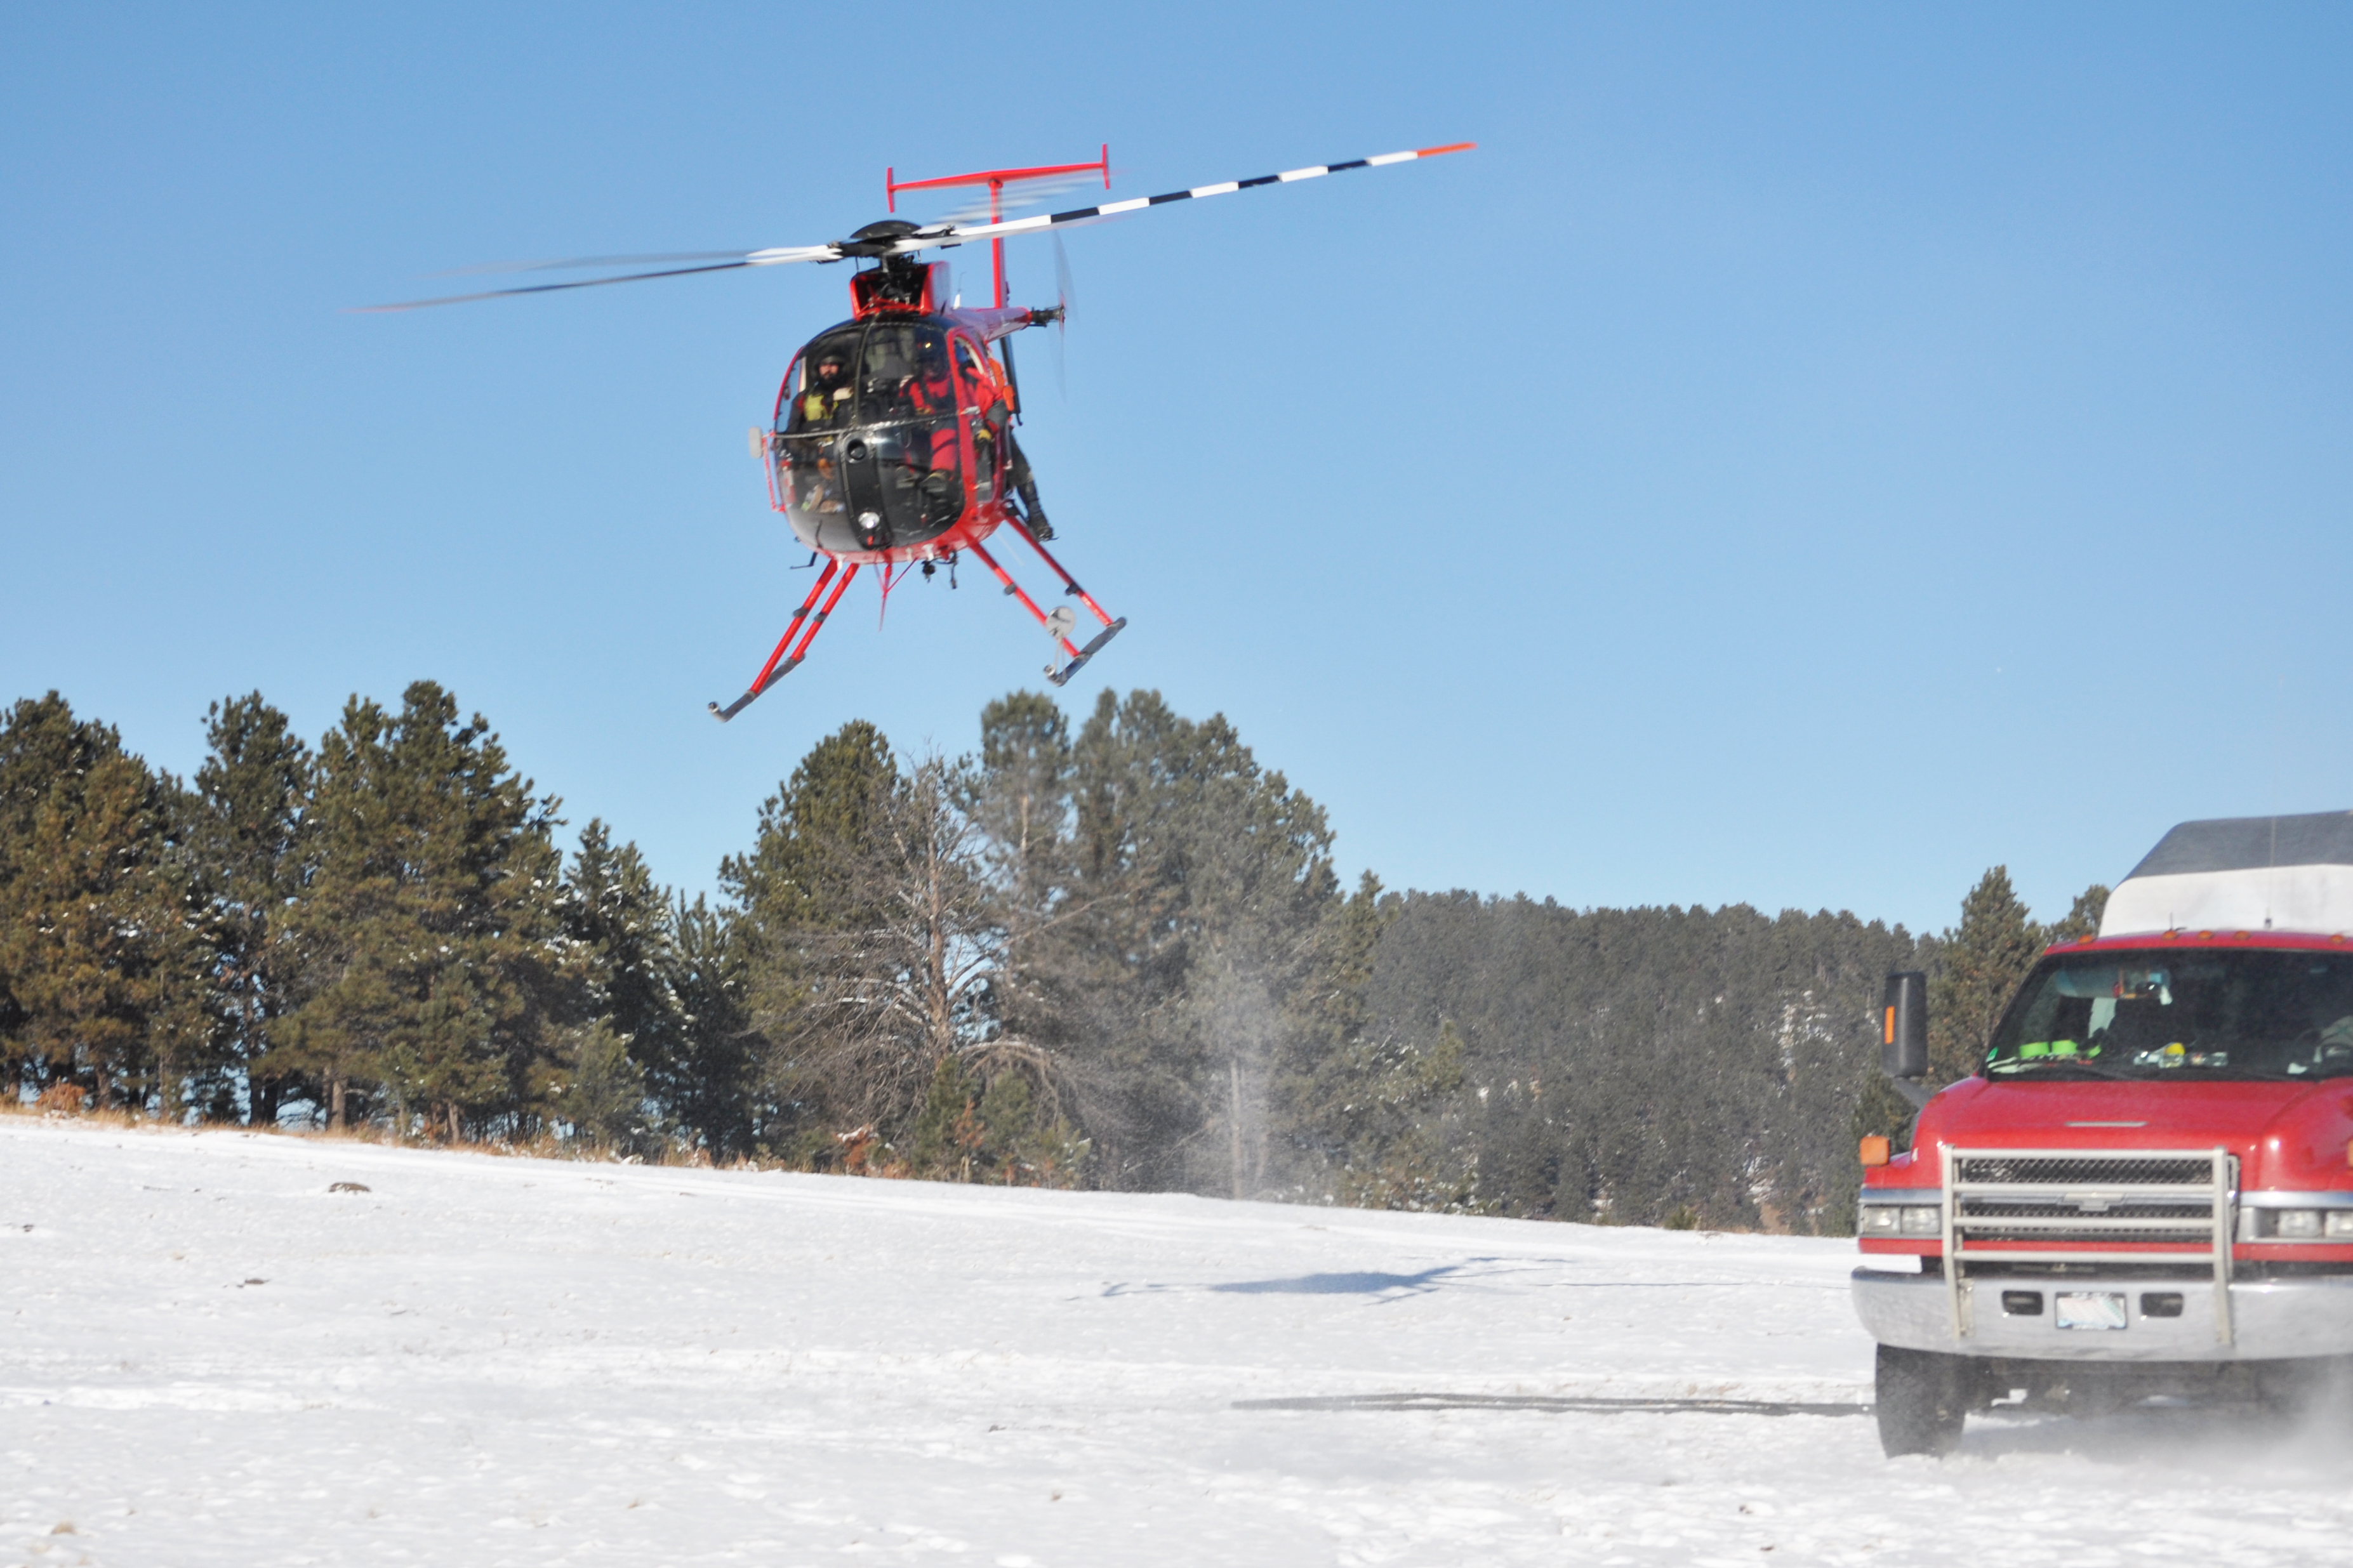 Photo showing a small, red helicopter taking off from a snowy field next to a fuel truck.